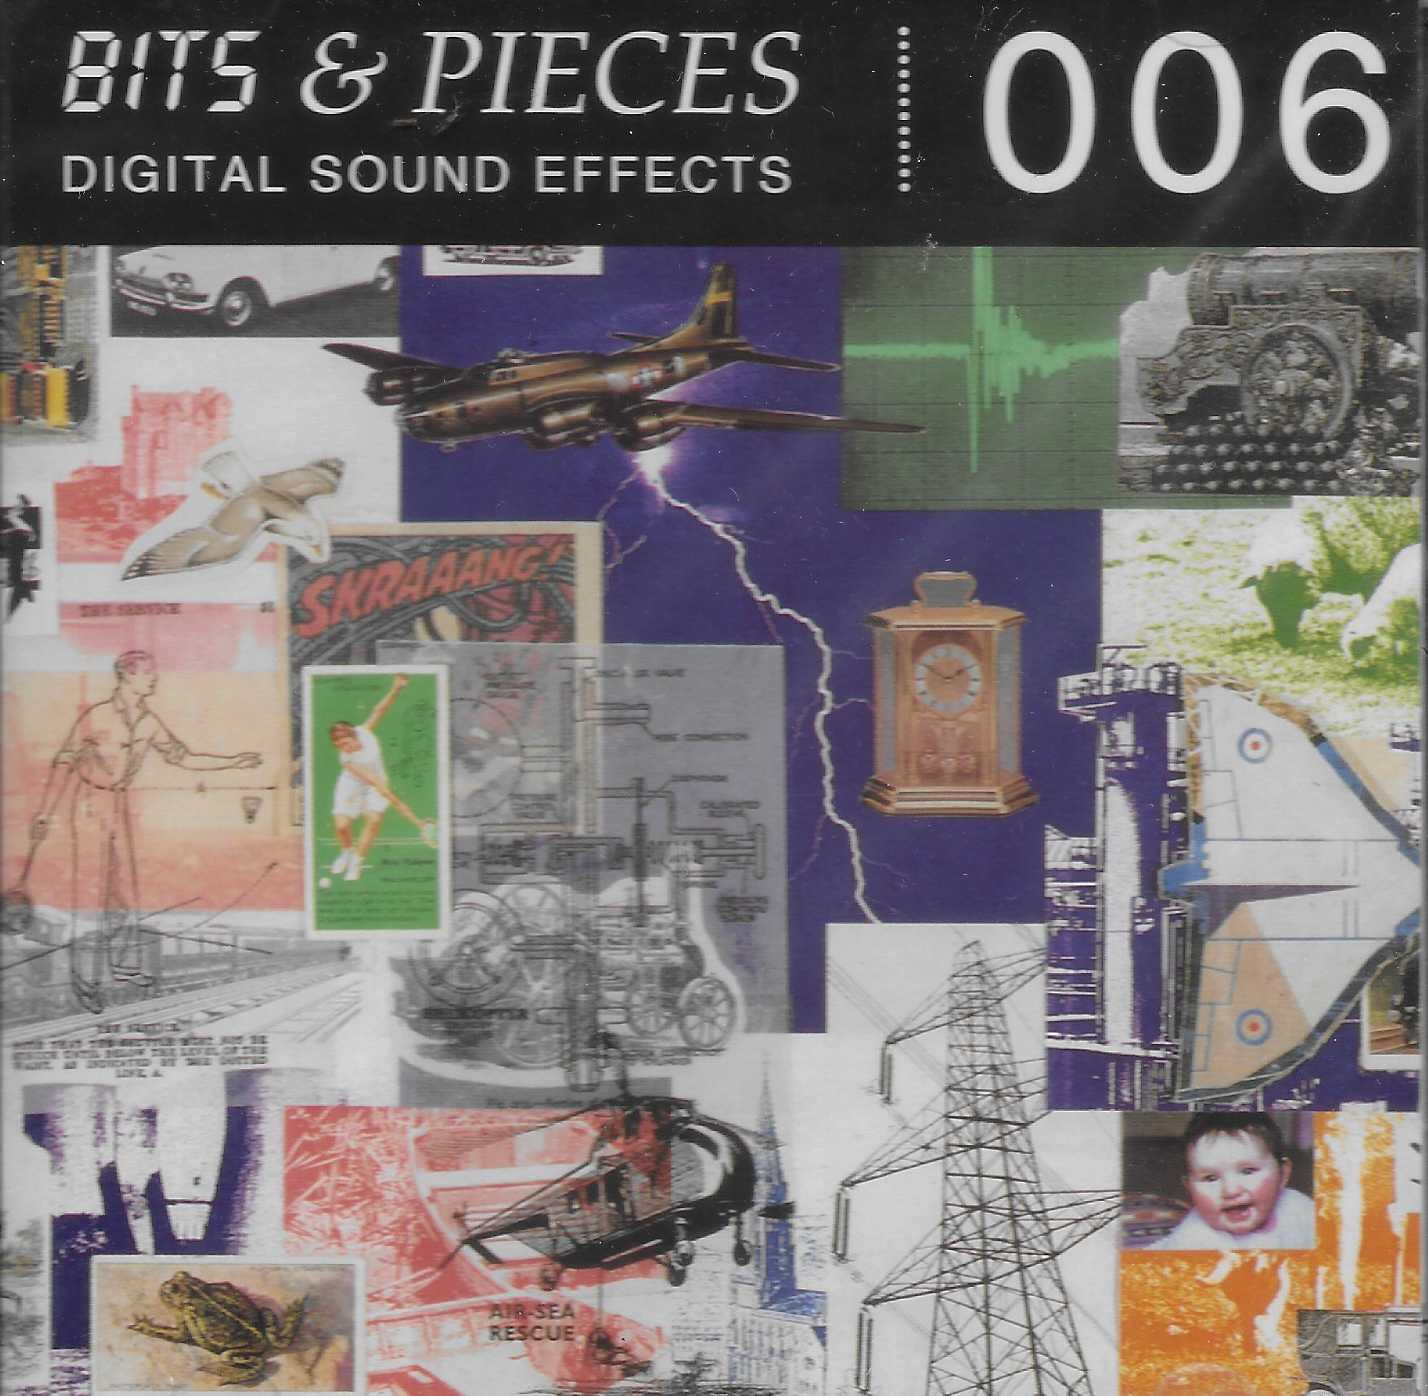 Picture of BITS 006 Bits & pieces digital sound effects 006 by artist Various from ITV, Channel 4 and Channel 5 cds library